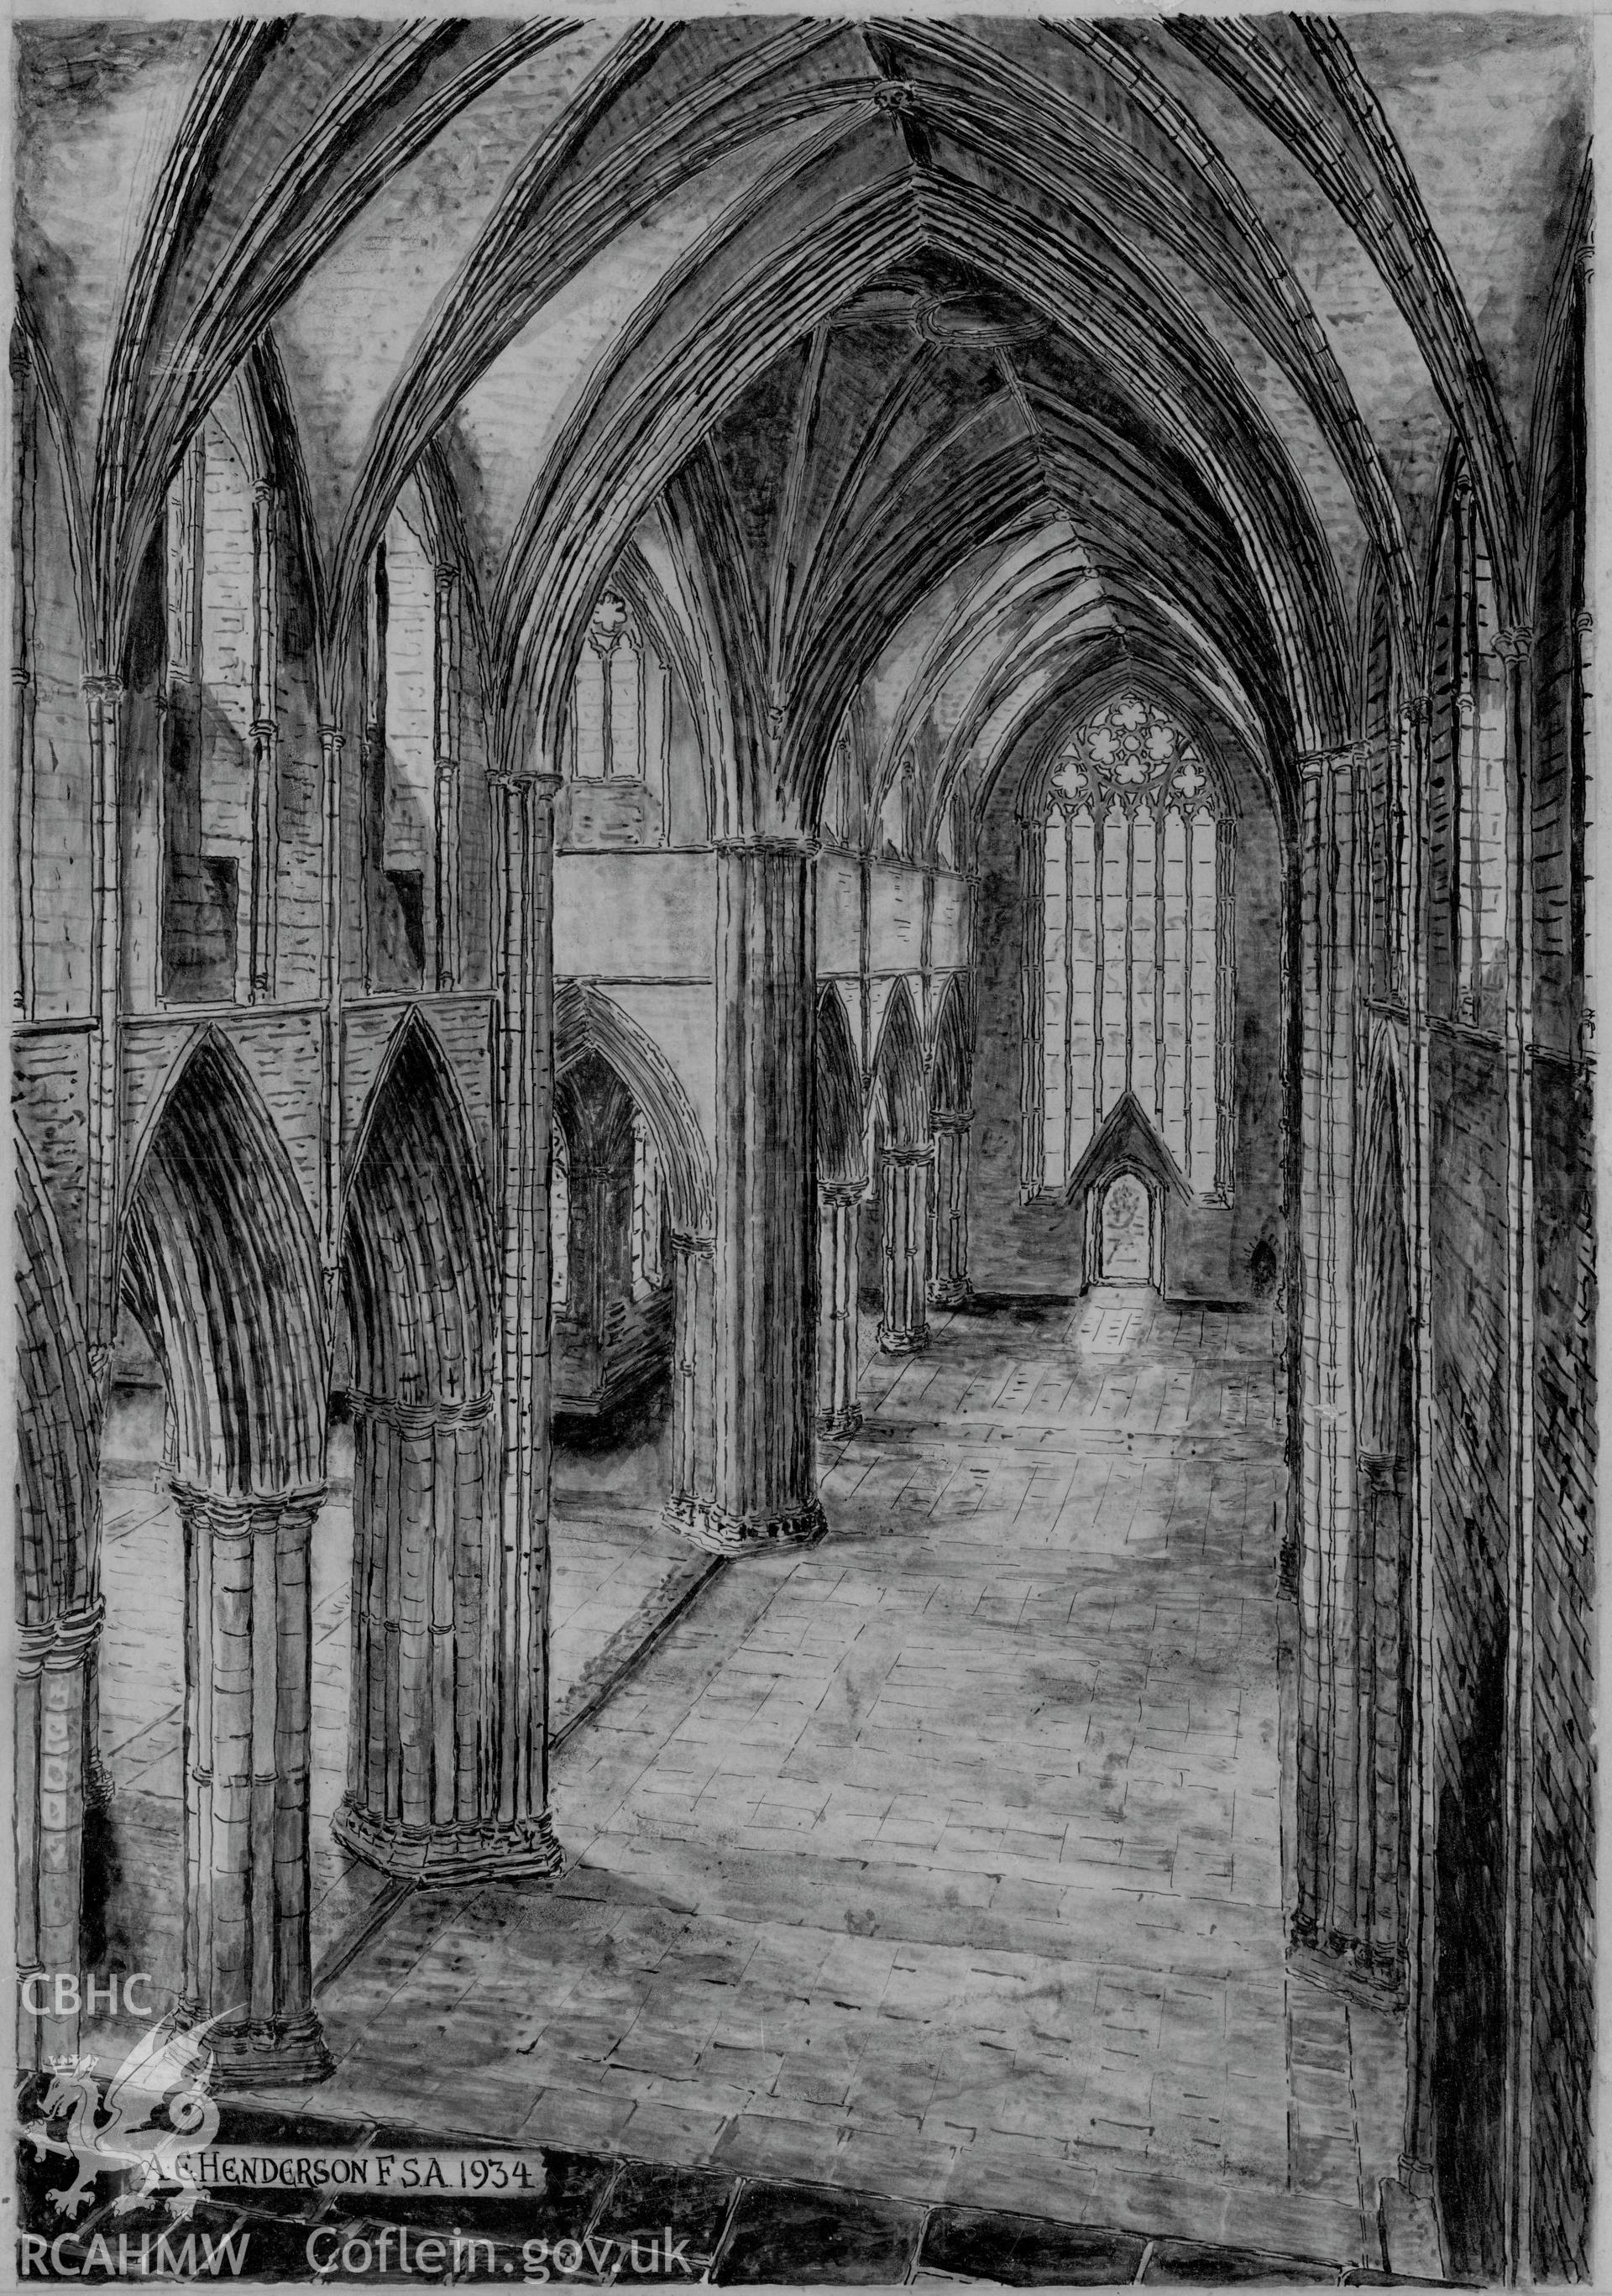 Digital copy of a conjectural reconstruction drawing of 'Tintern Abbey as Erected: The Transepts Looking South' produced by Arthur E. Henderson, 1934.